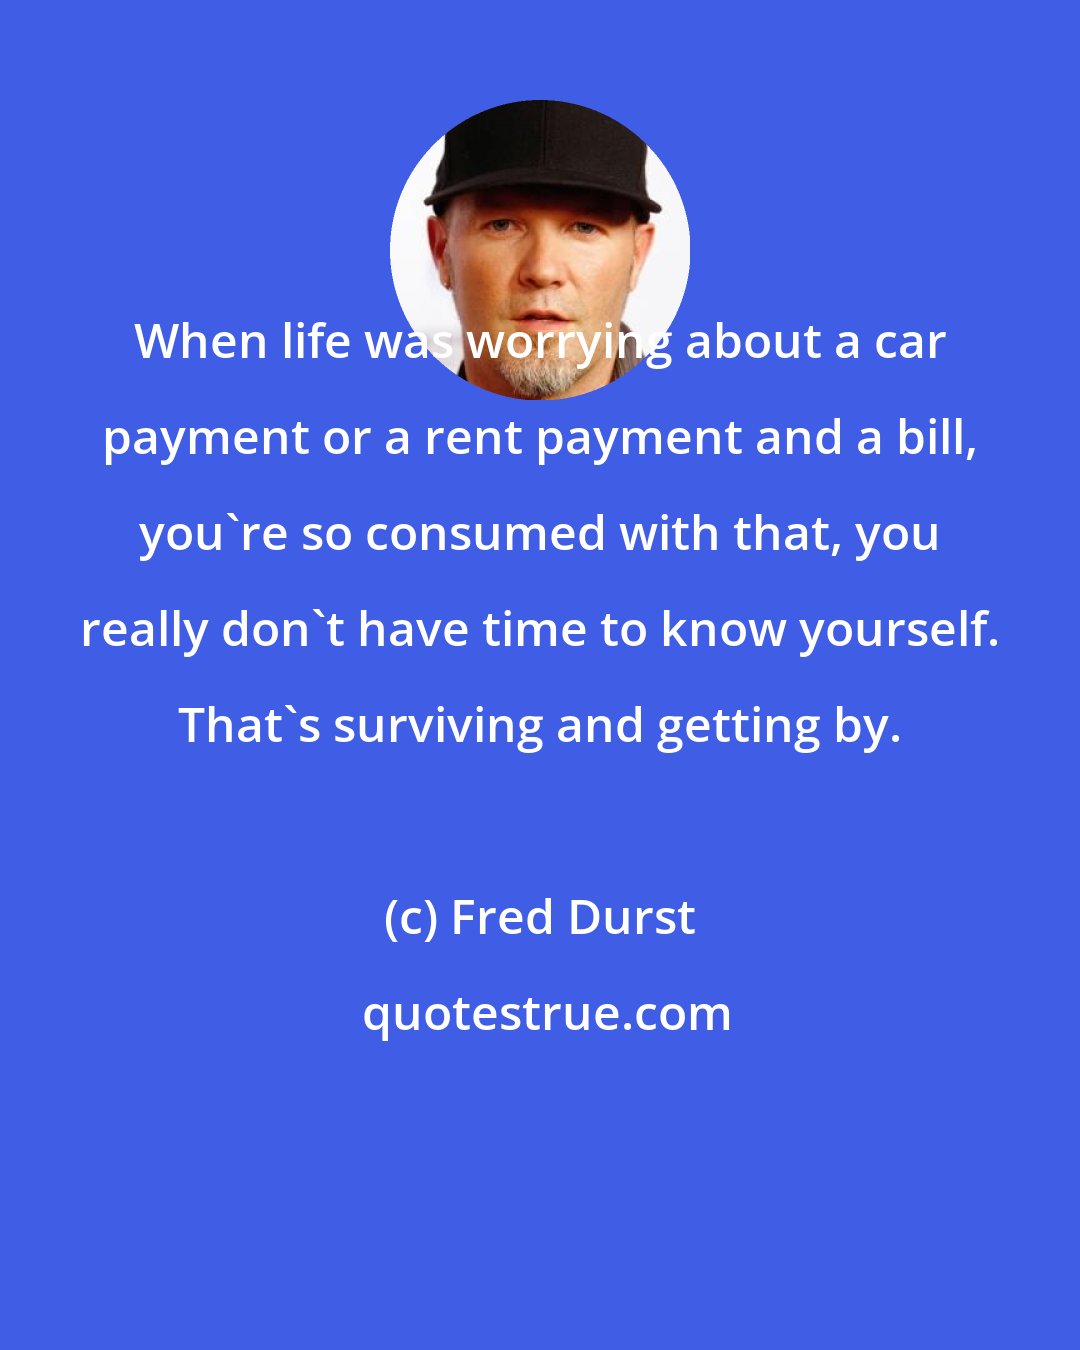 Fred Durst: When life was worrying about a car payment or a rent payment and a bill, you're so consumed with that, you really don't have time to know yourself. That's surviving and getting by.